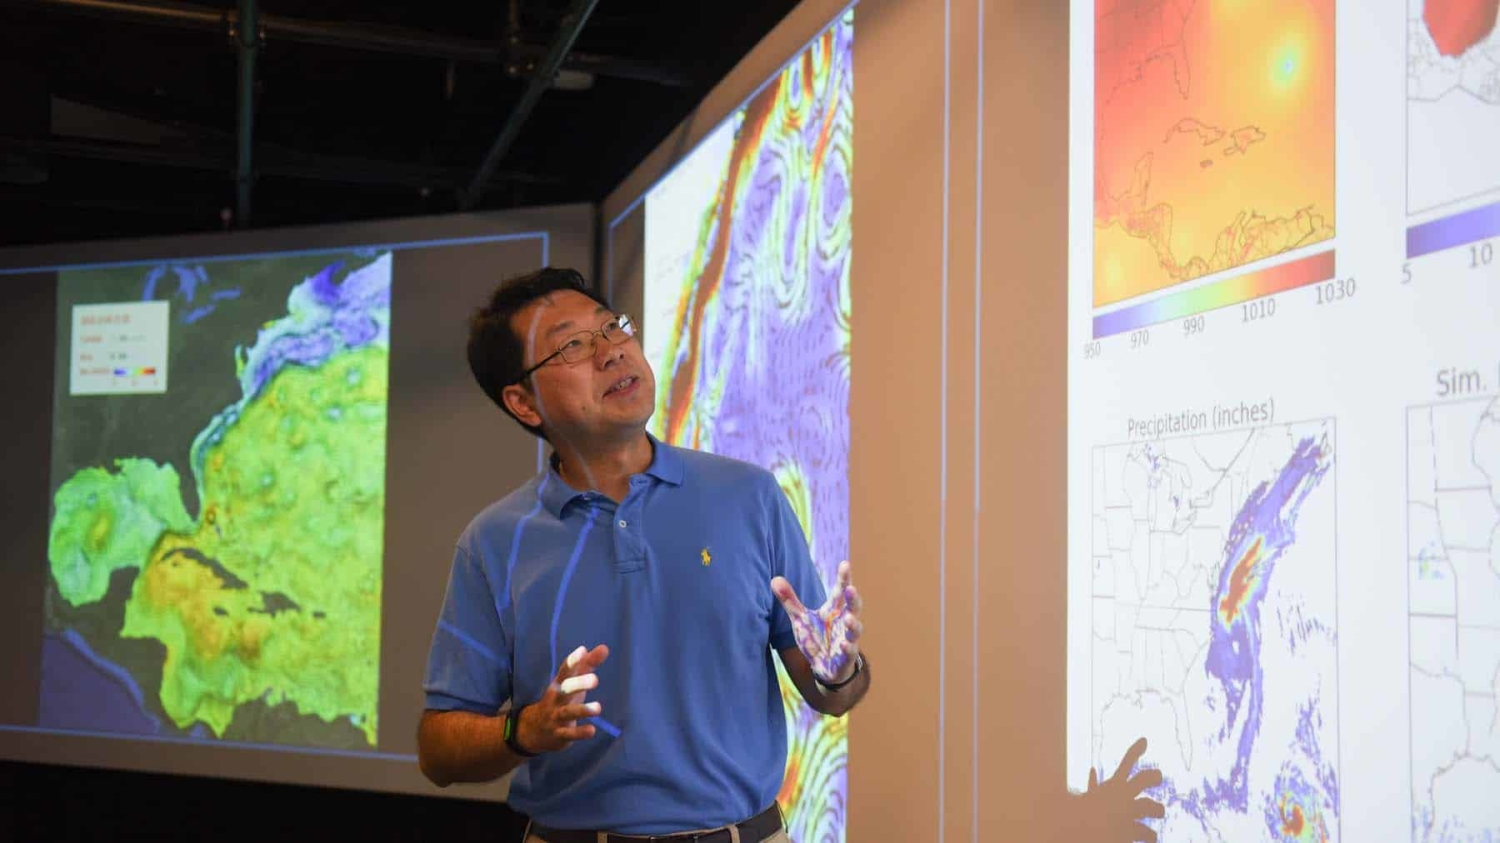 Ruoying He looks at ocean weather visualizations on large screens